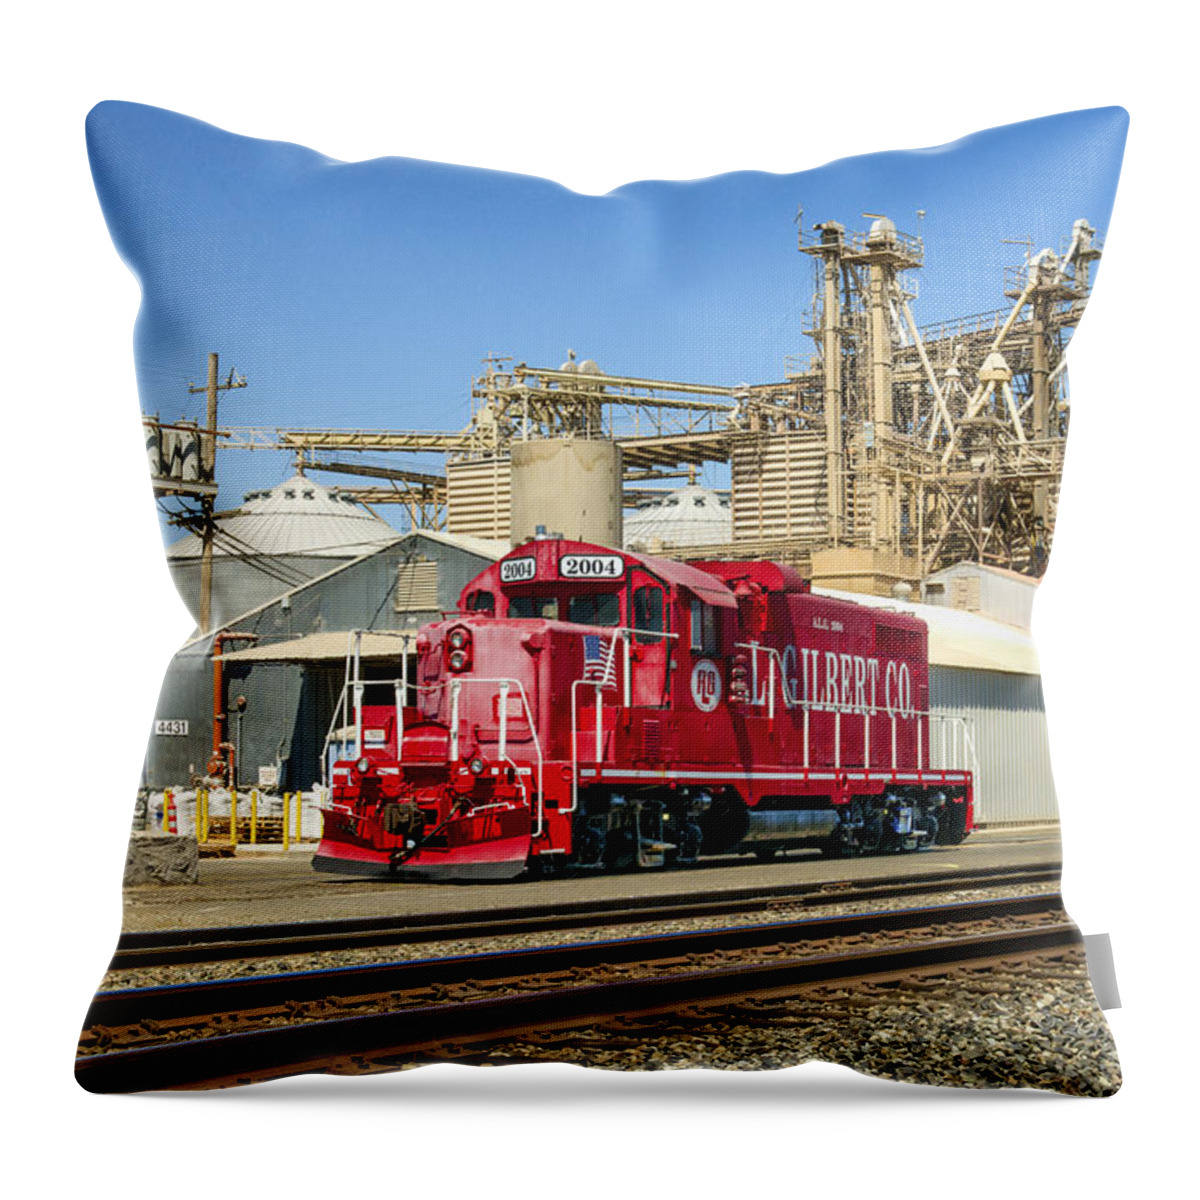 A.l. Gilbert Co. Throw Pillow featuring the photograph The Red Locomotive by Jim Thompson